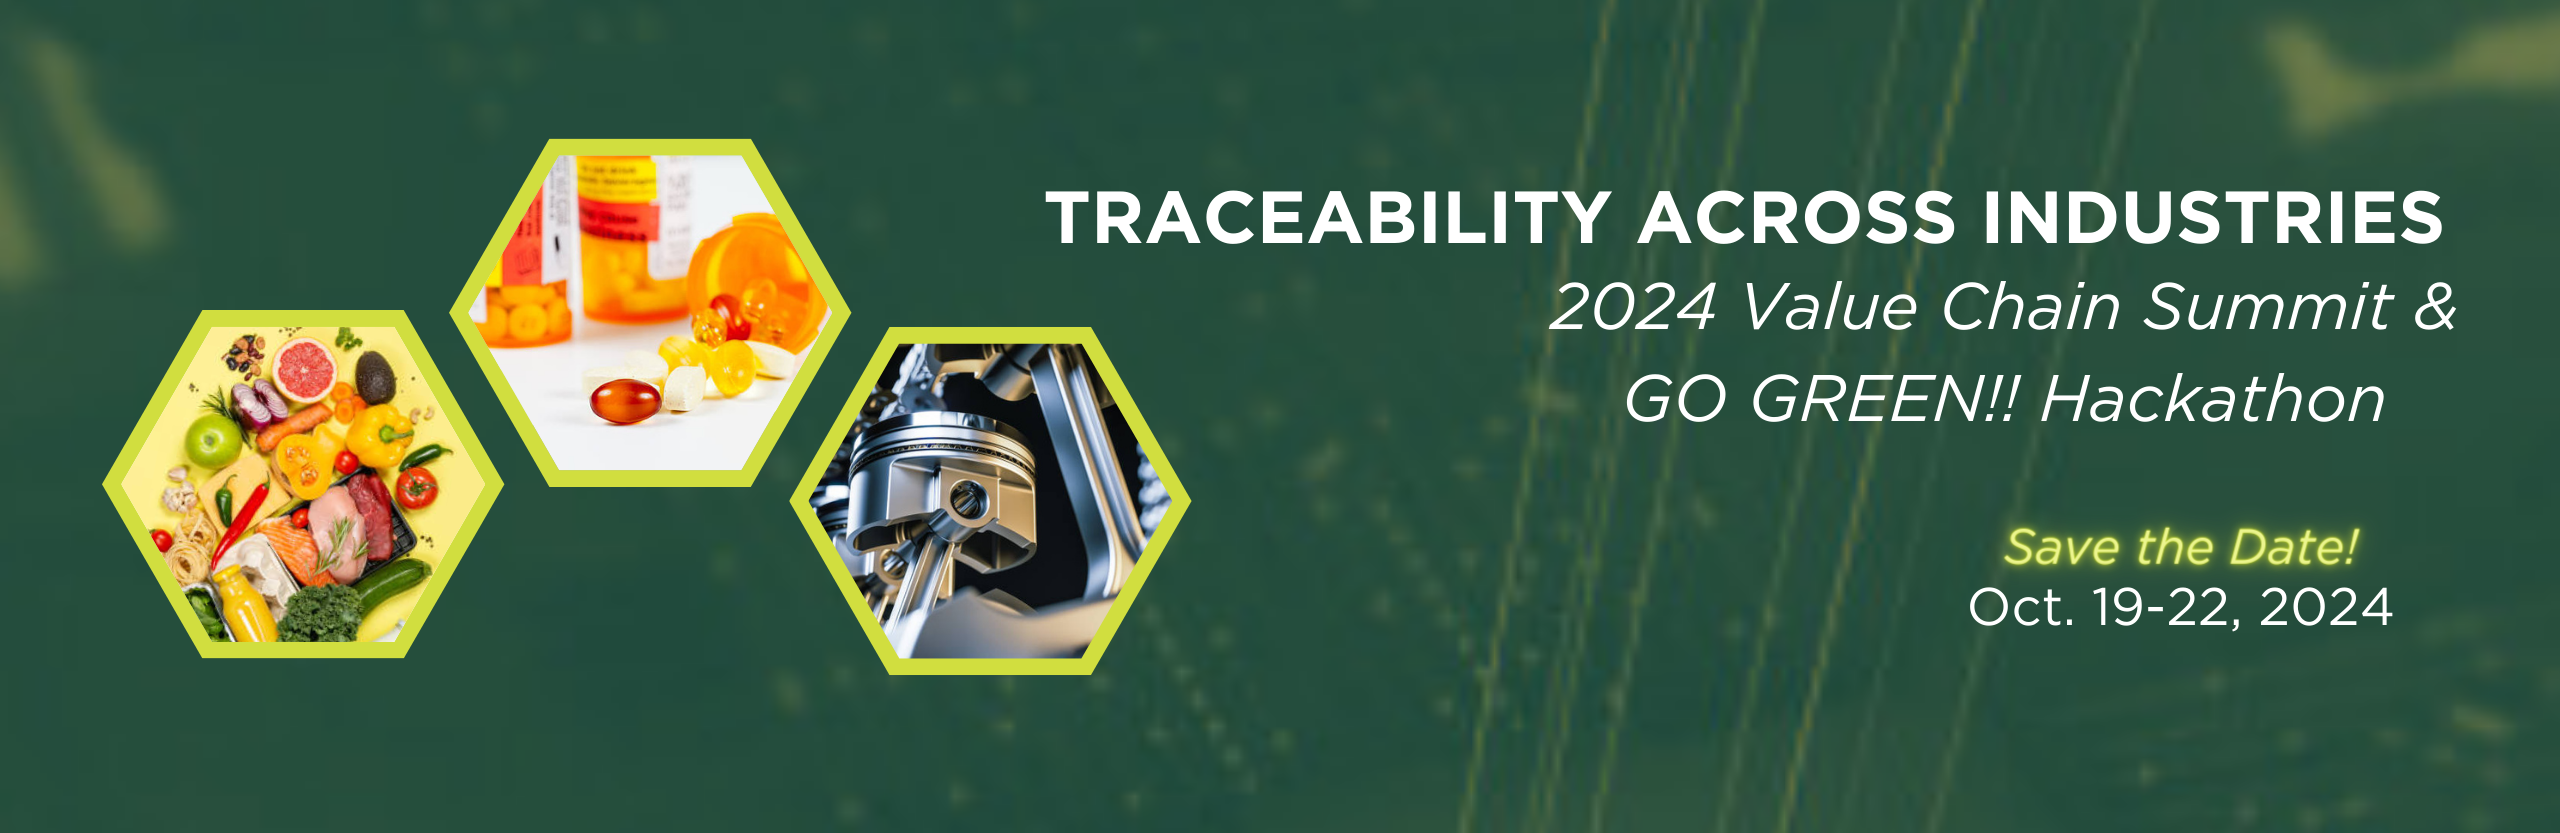 Trace3ability Across Industries 2024 Value Chain Summit and Go Green!! Hackathon with three pictures for food, pill bottles and car part